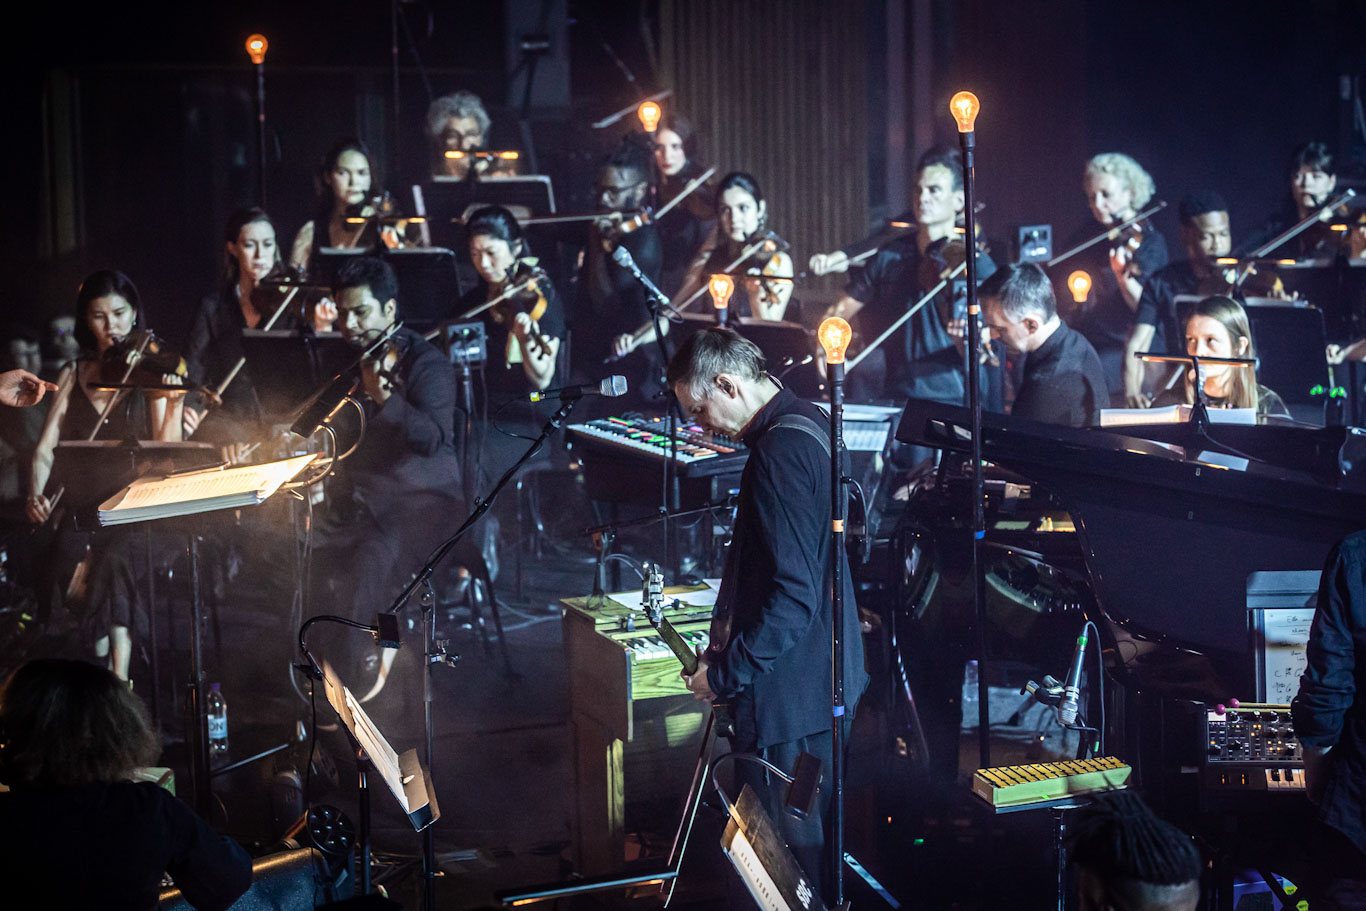 LIVE REVIEW: Sigur Rós & The London Contemporary Orchestra at Royal Festival Hall